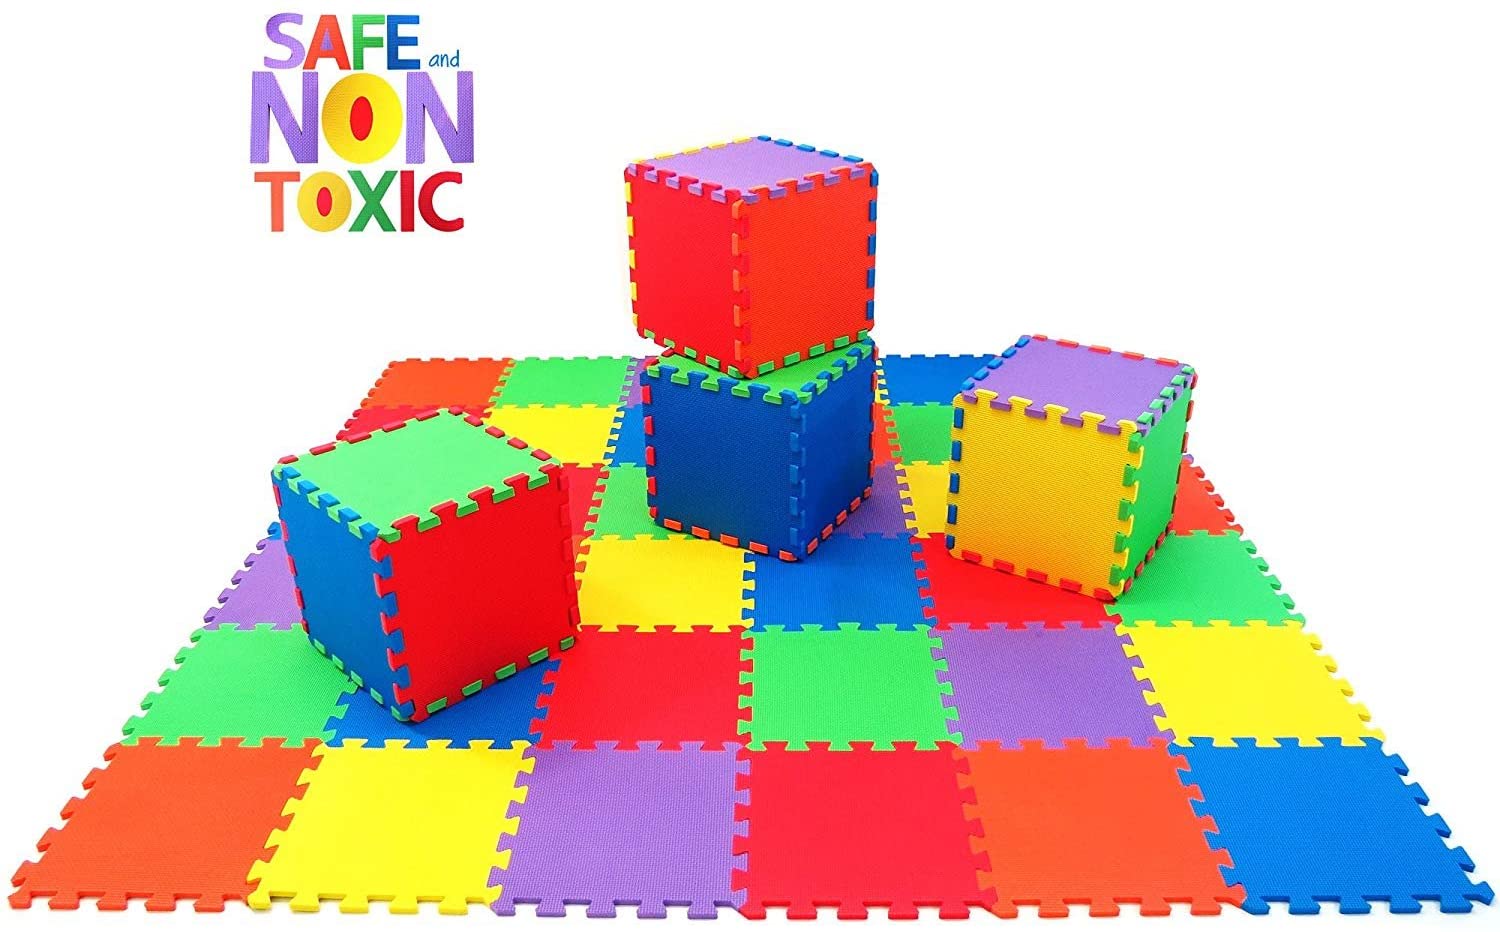 Non-Toxic Foam Puzzle Floor Mat, Comfortable, Extra Thick, Cushiony Ex -  Play Platoon